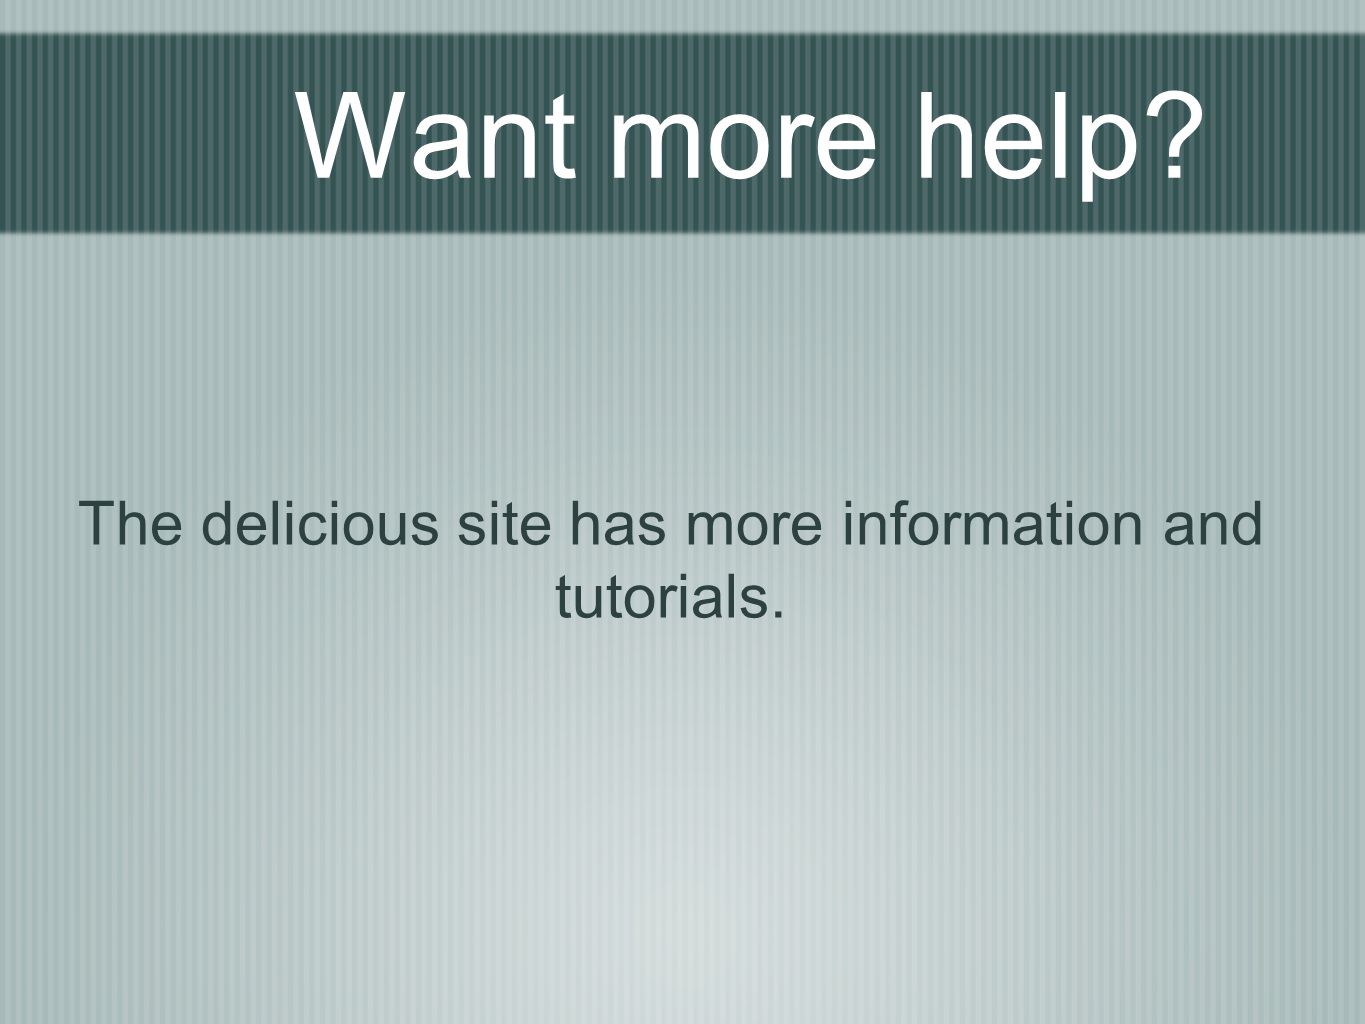 Want more help The delicious site has more information and tutorials.